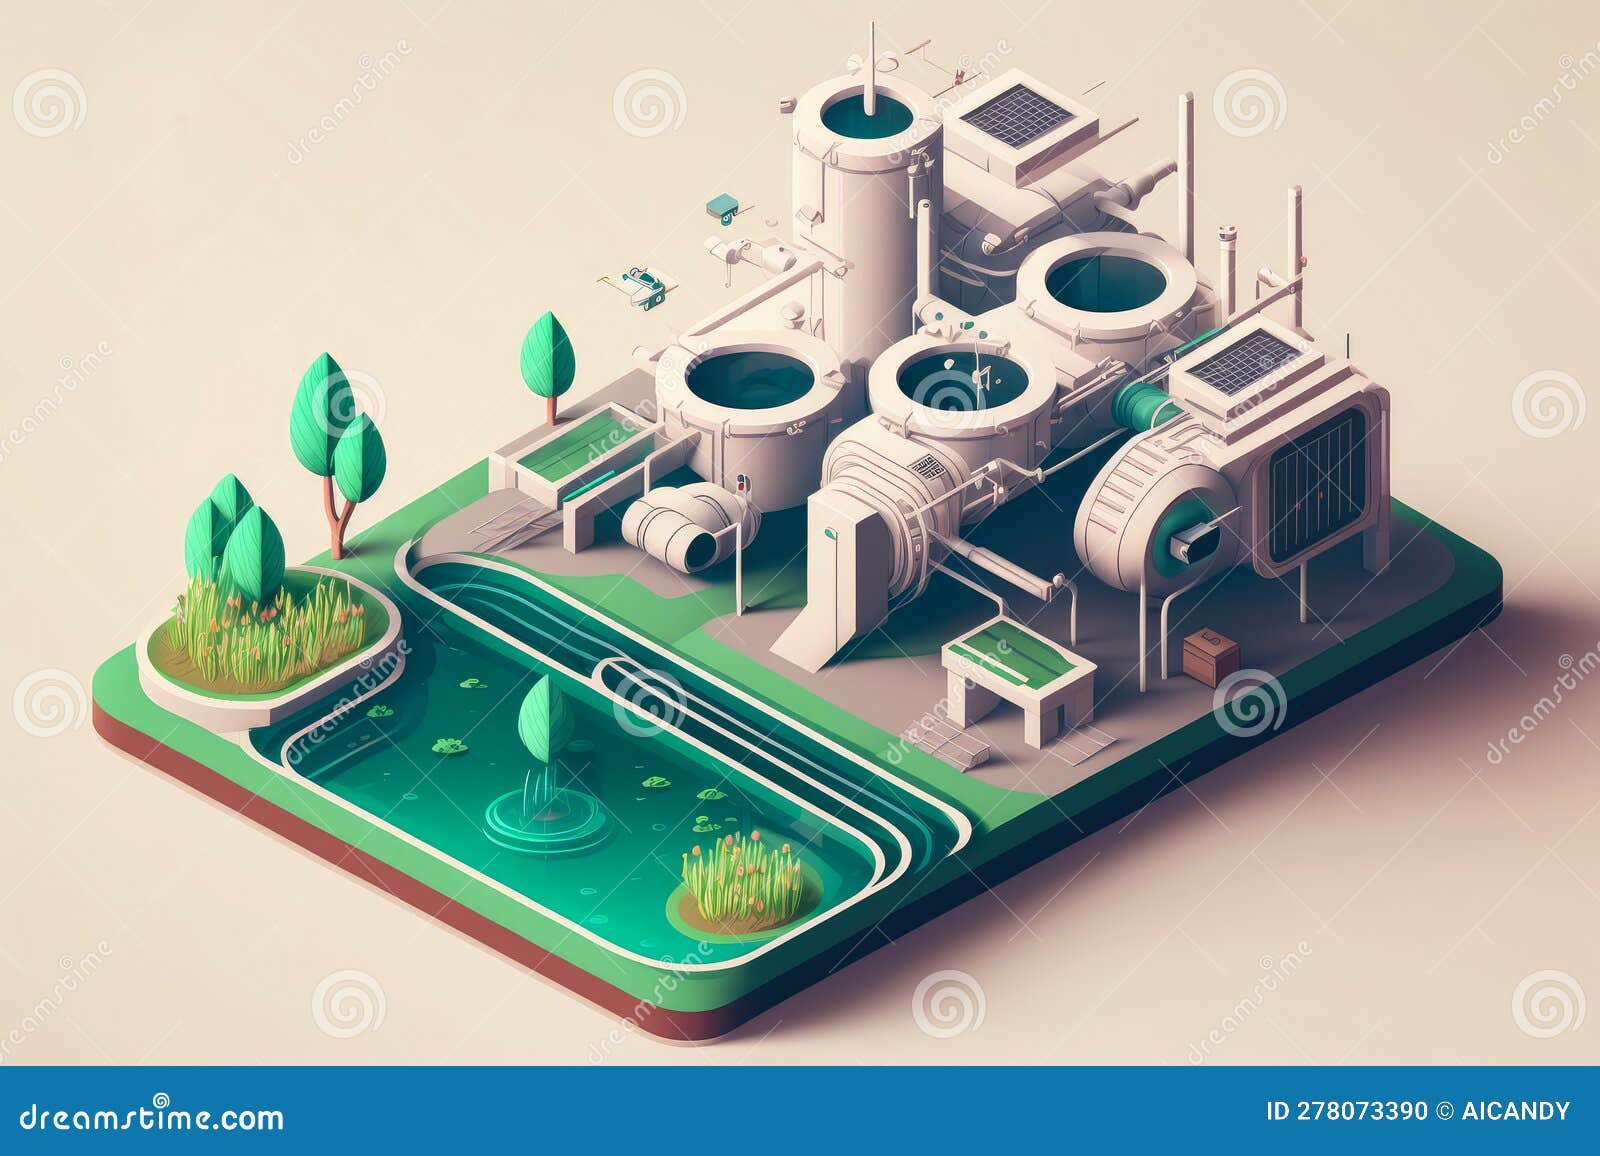 Futuristic Vector Style Illustration of a Wastewater Treatment Plant ...